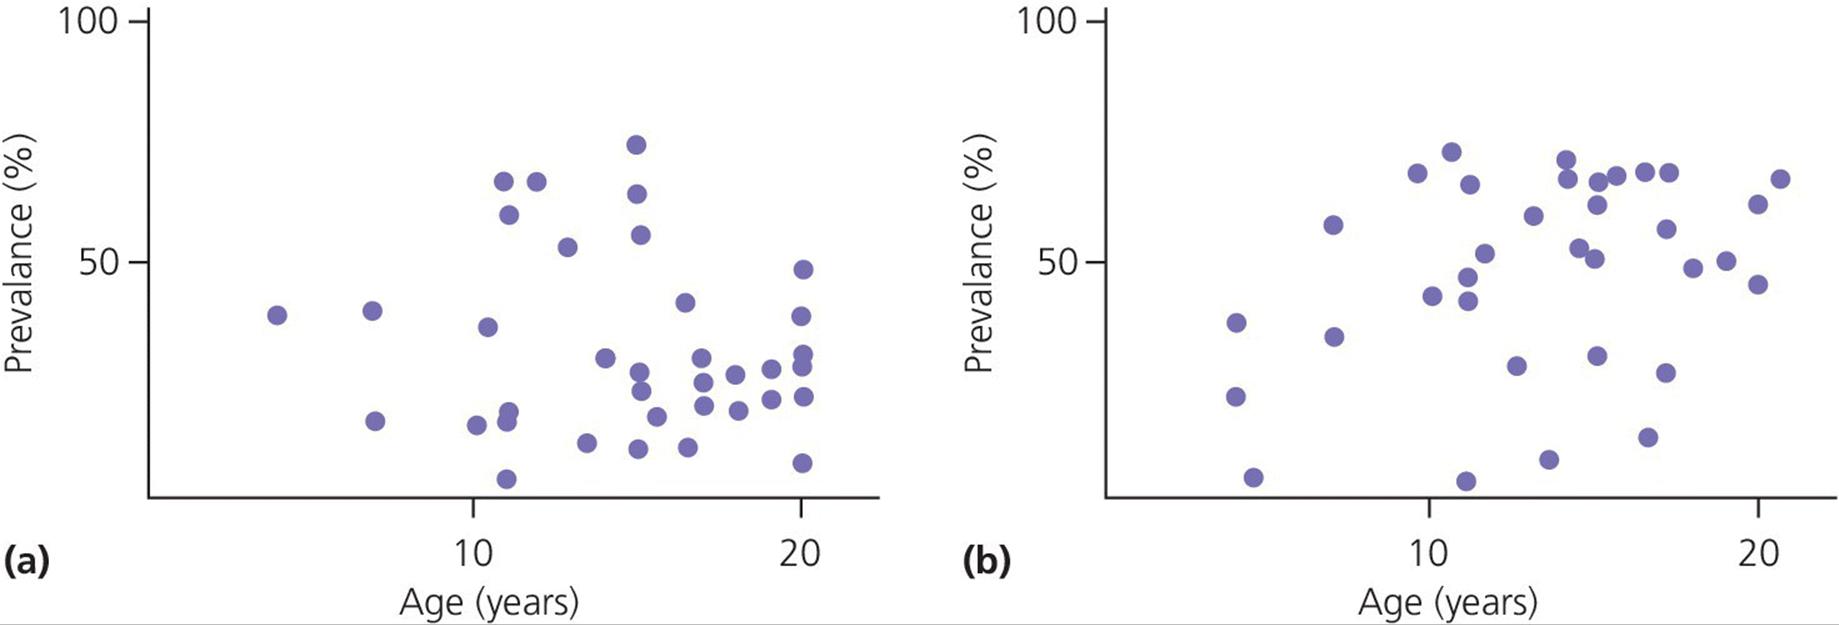 Scatterplot of prevalance over age for subjective symptoms (left) and clinical signs (right) of TMD presented in different epidemiologic studies of children and adolescents.